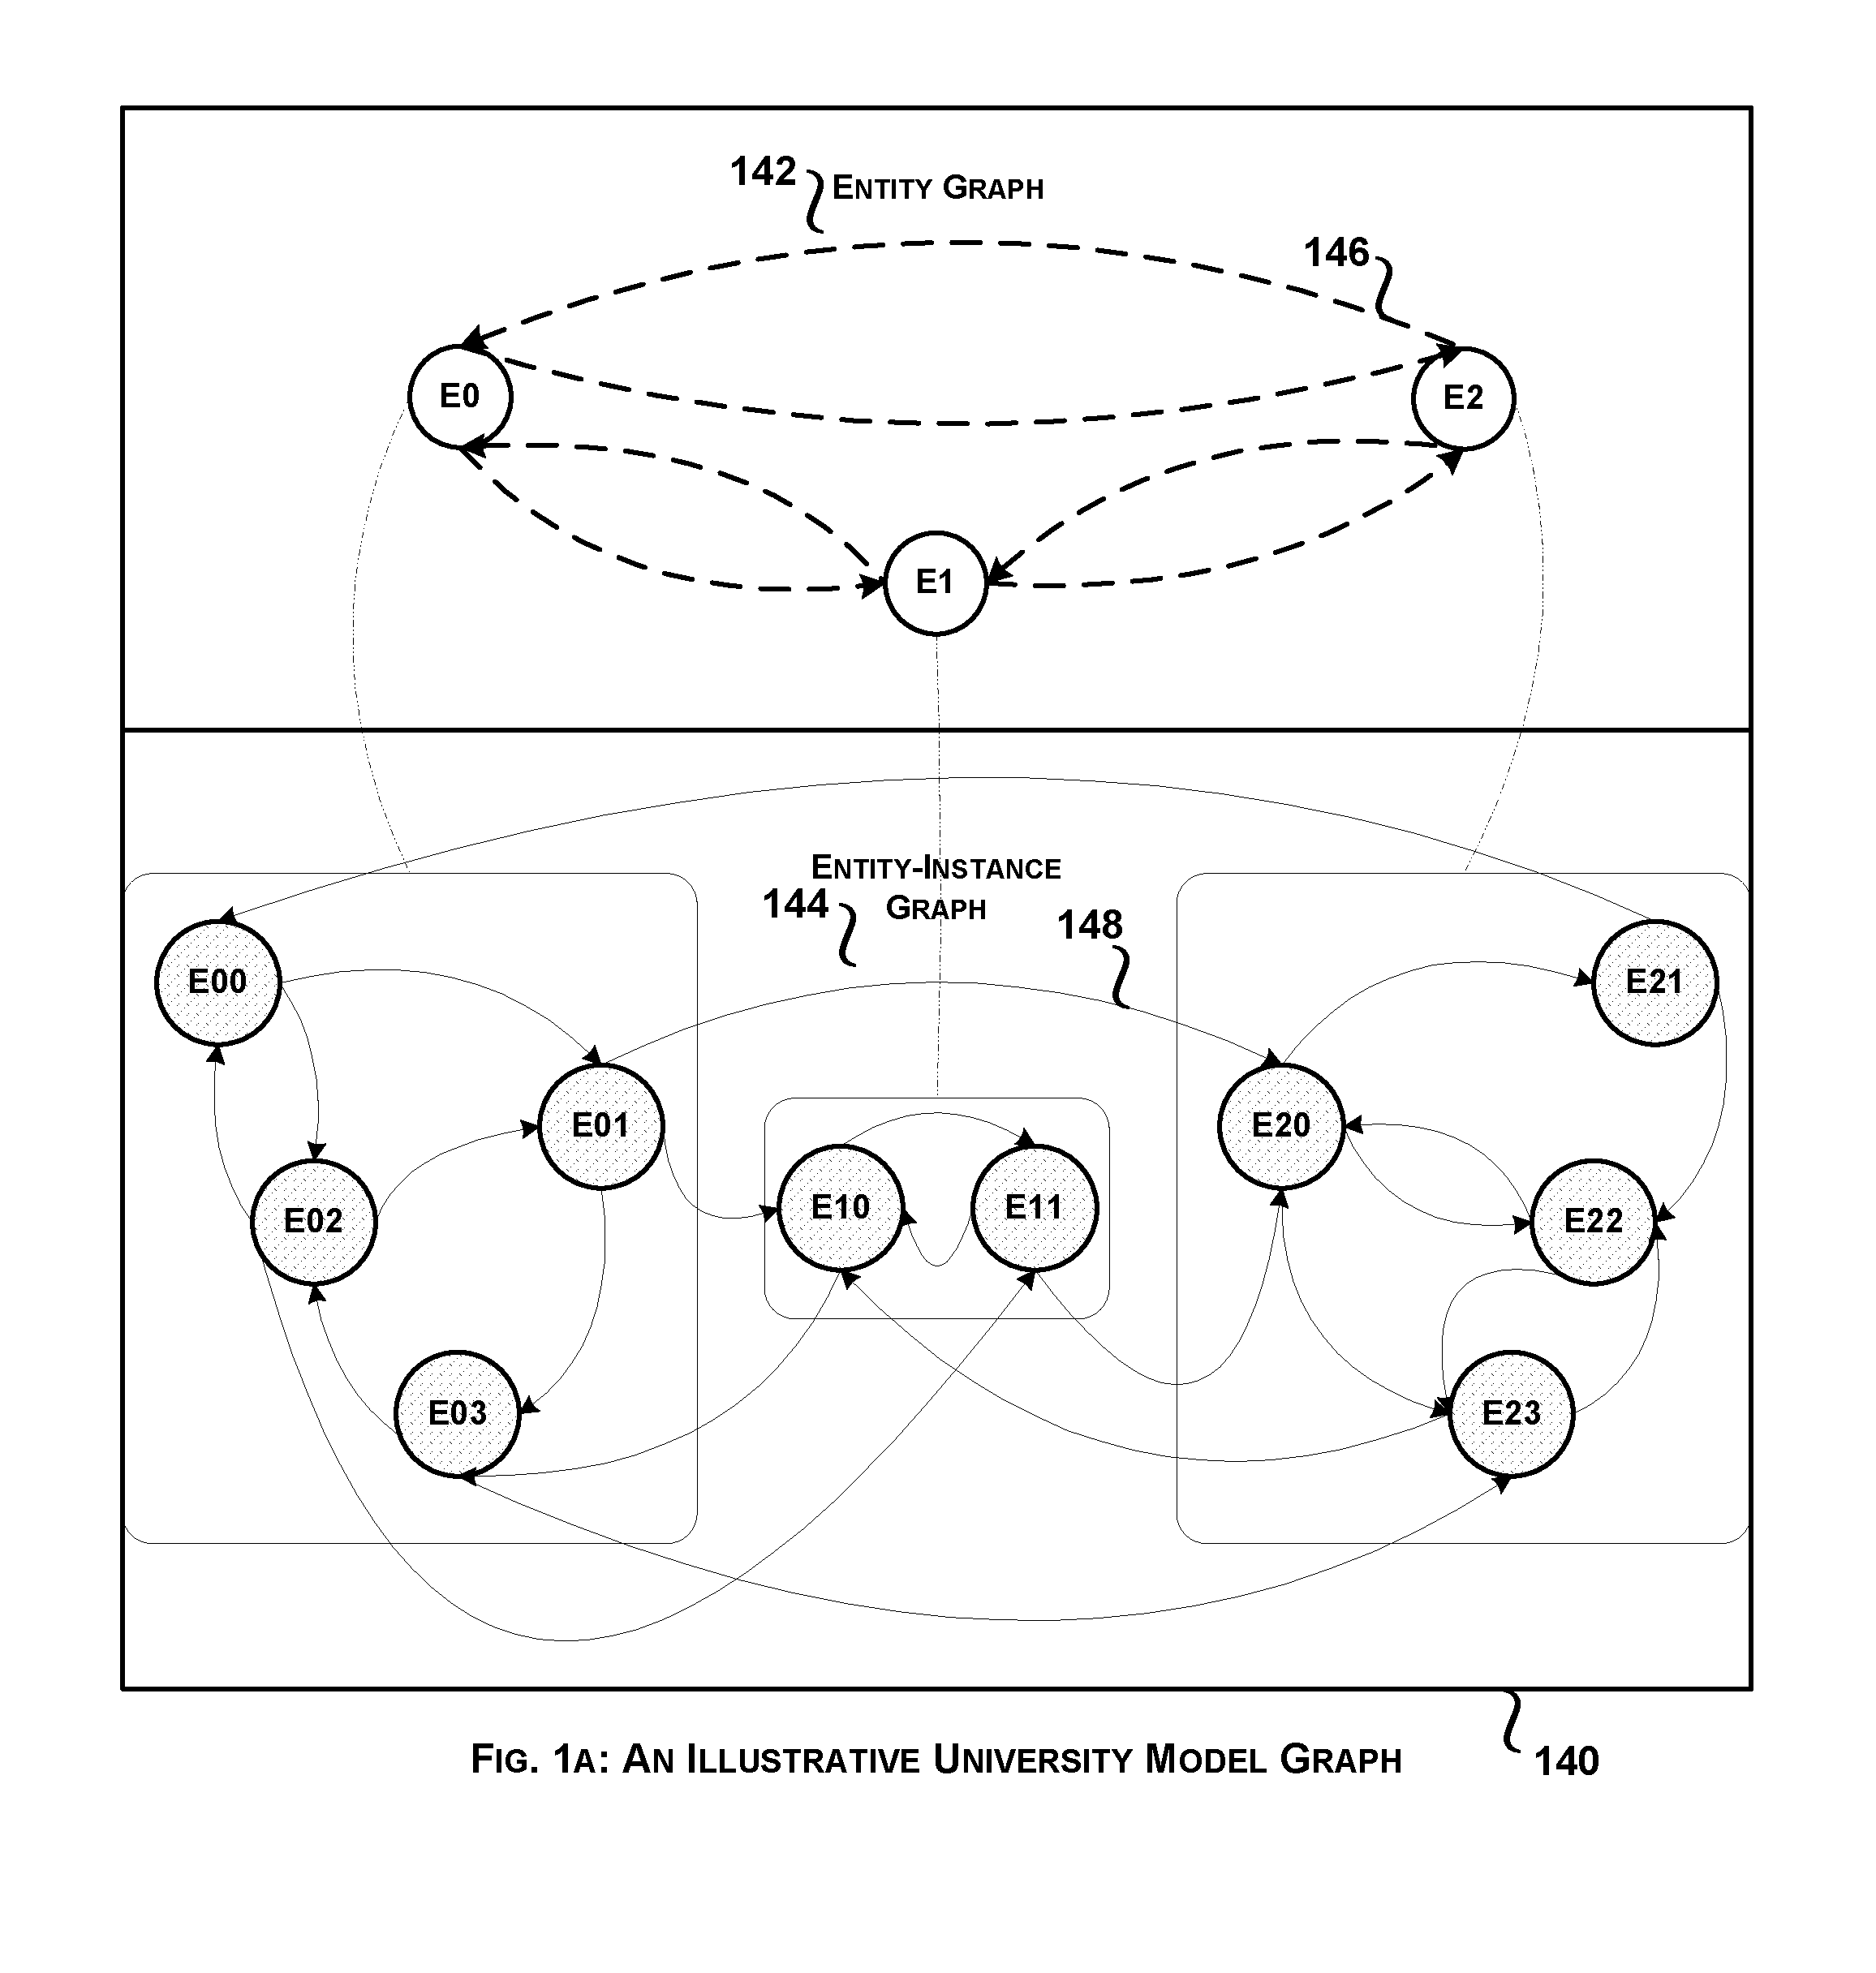 System and method for university model graph based visualization